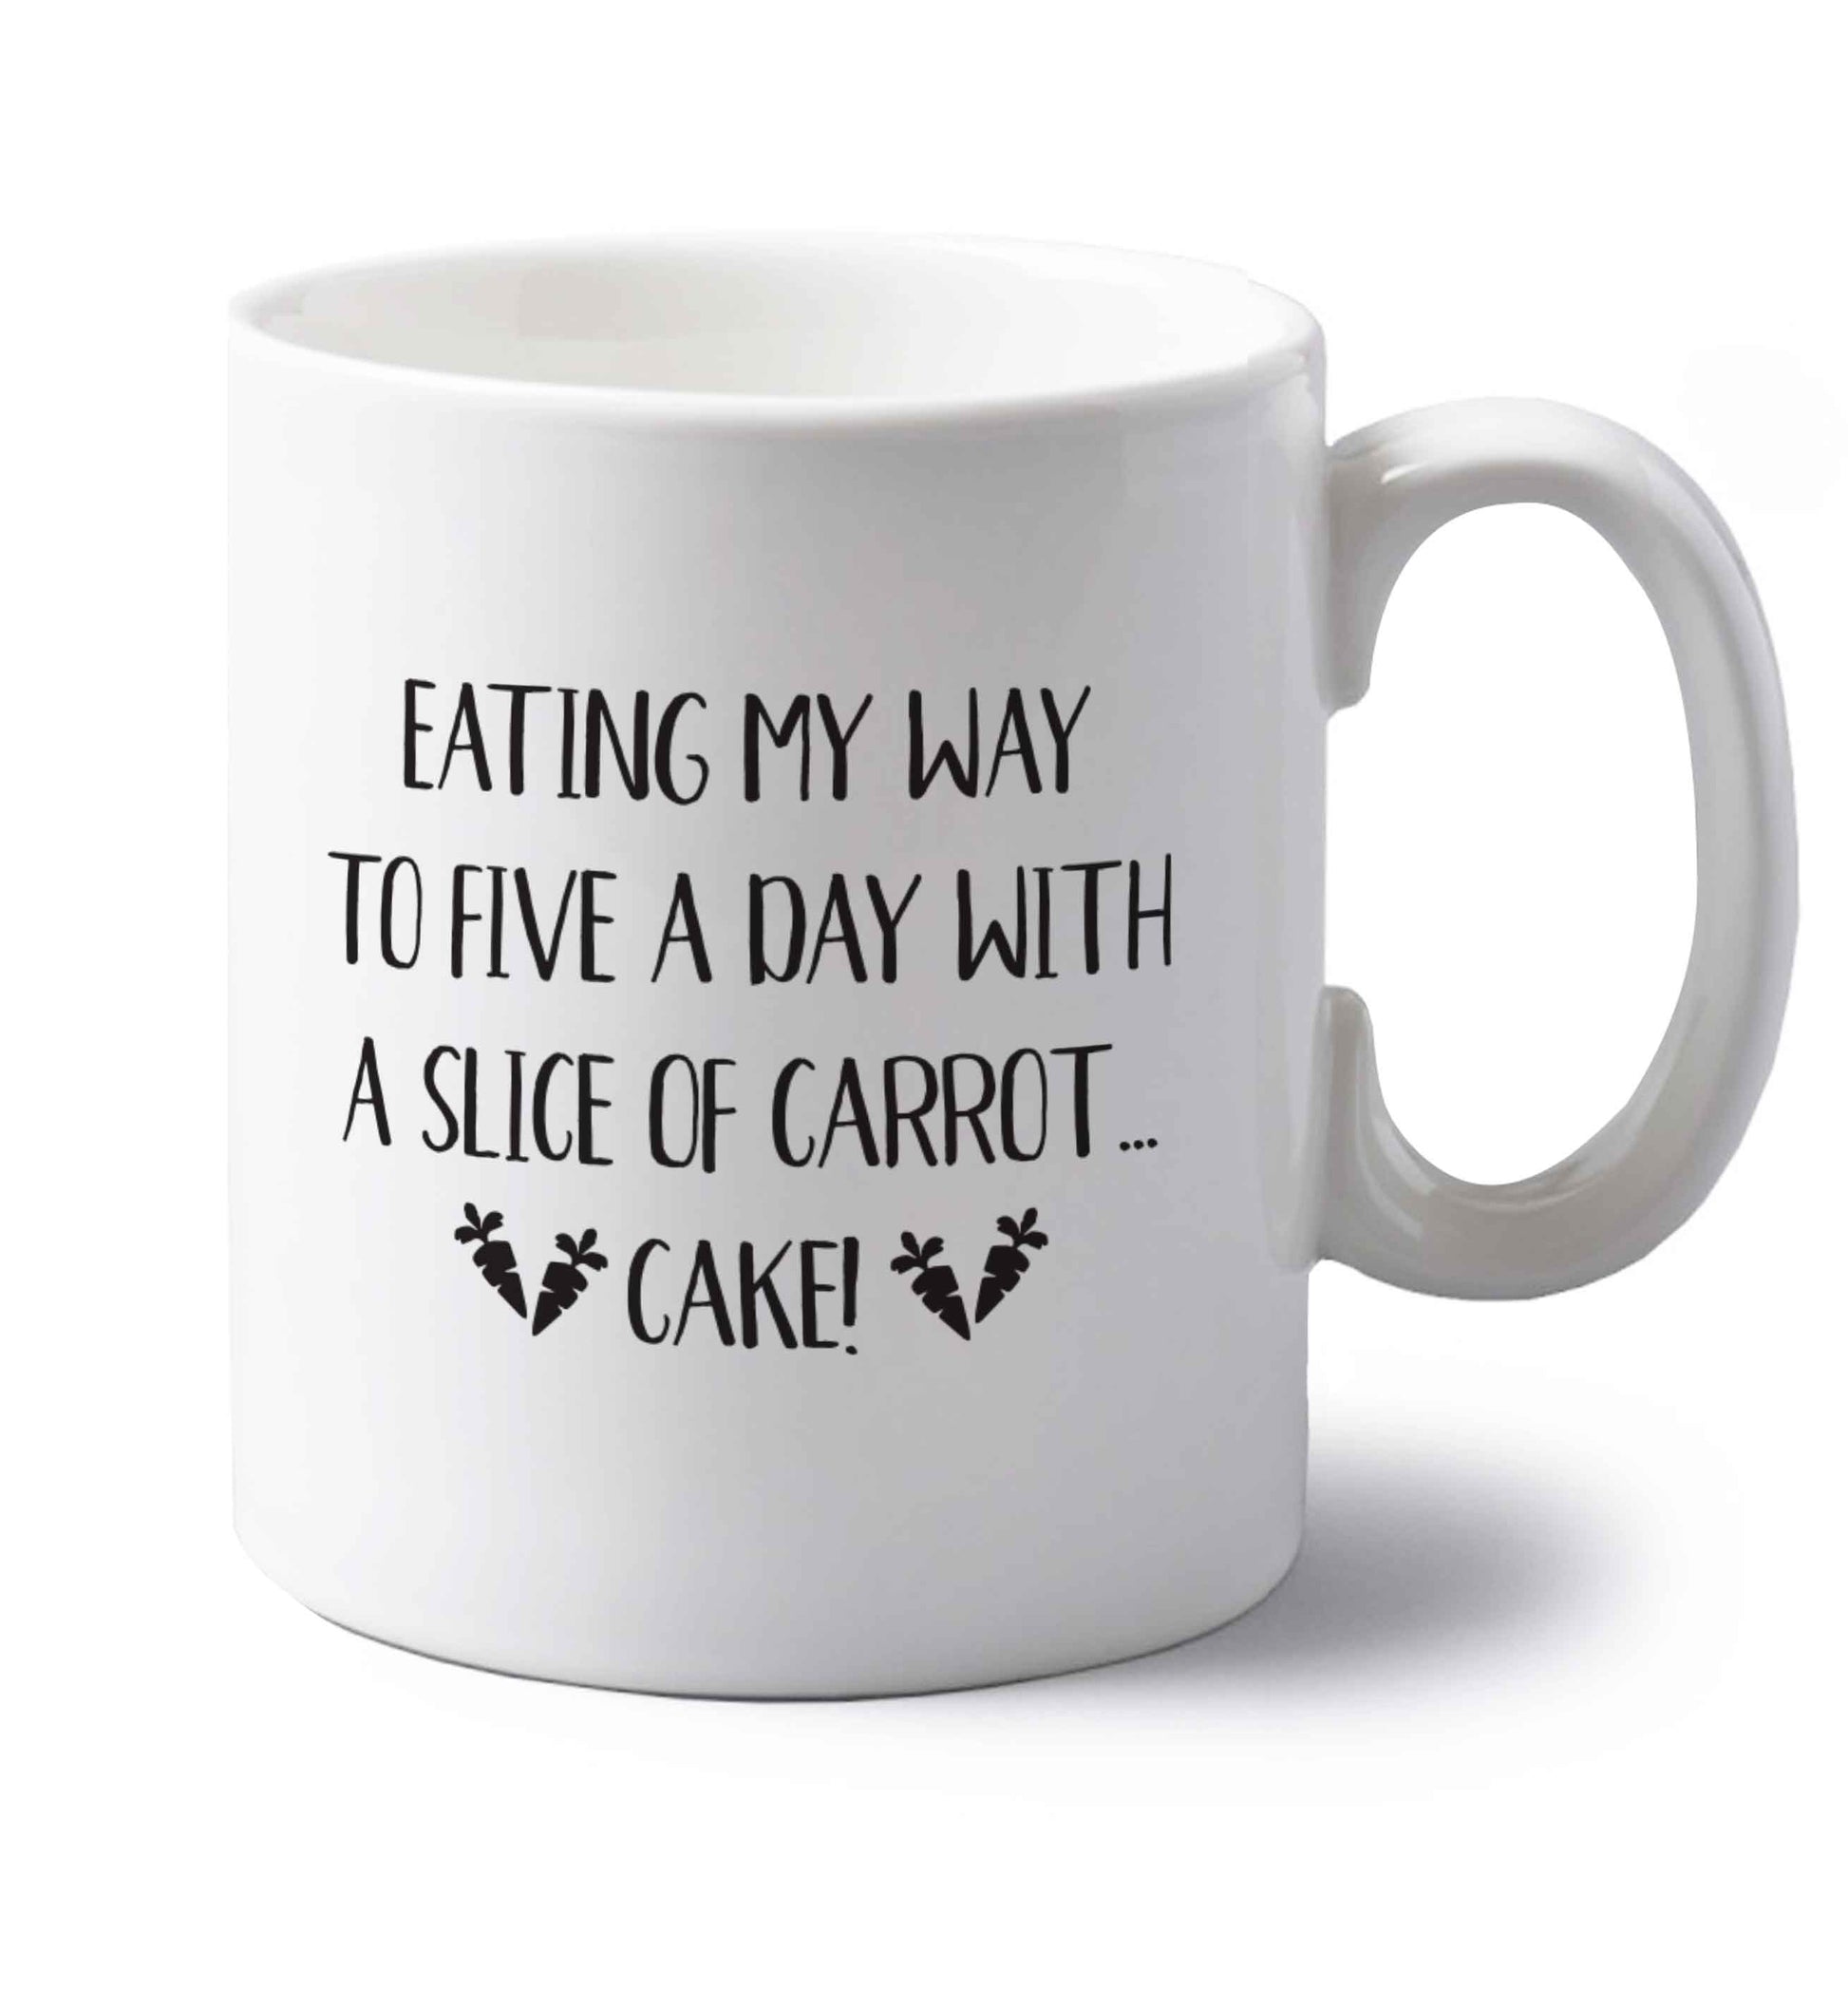 Eating my way to five a day with a slice of carrot cake day left handed white ceramic mug 